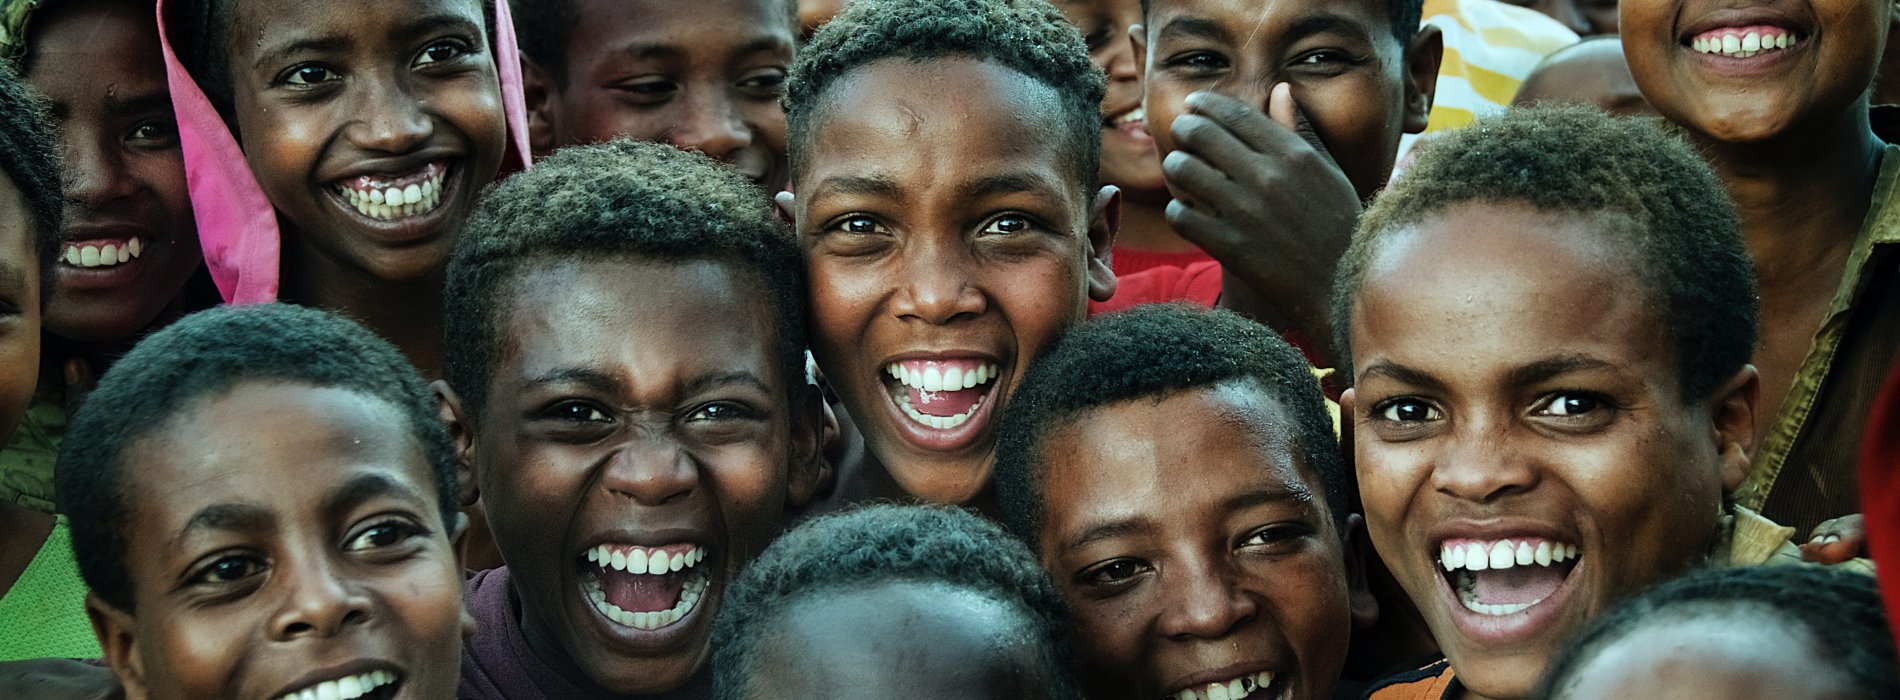 A group of children gathered together joyfully smile at the camera.